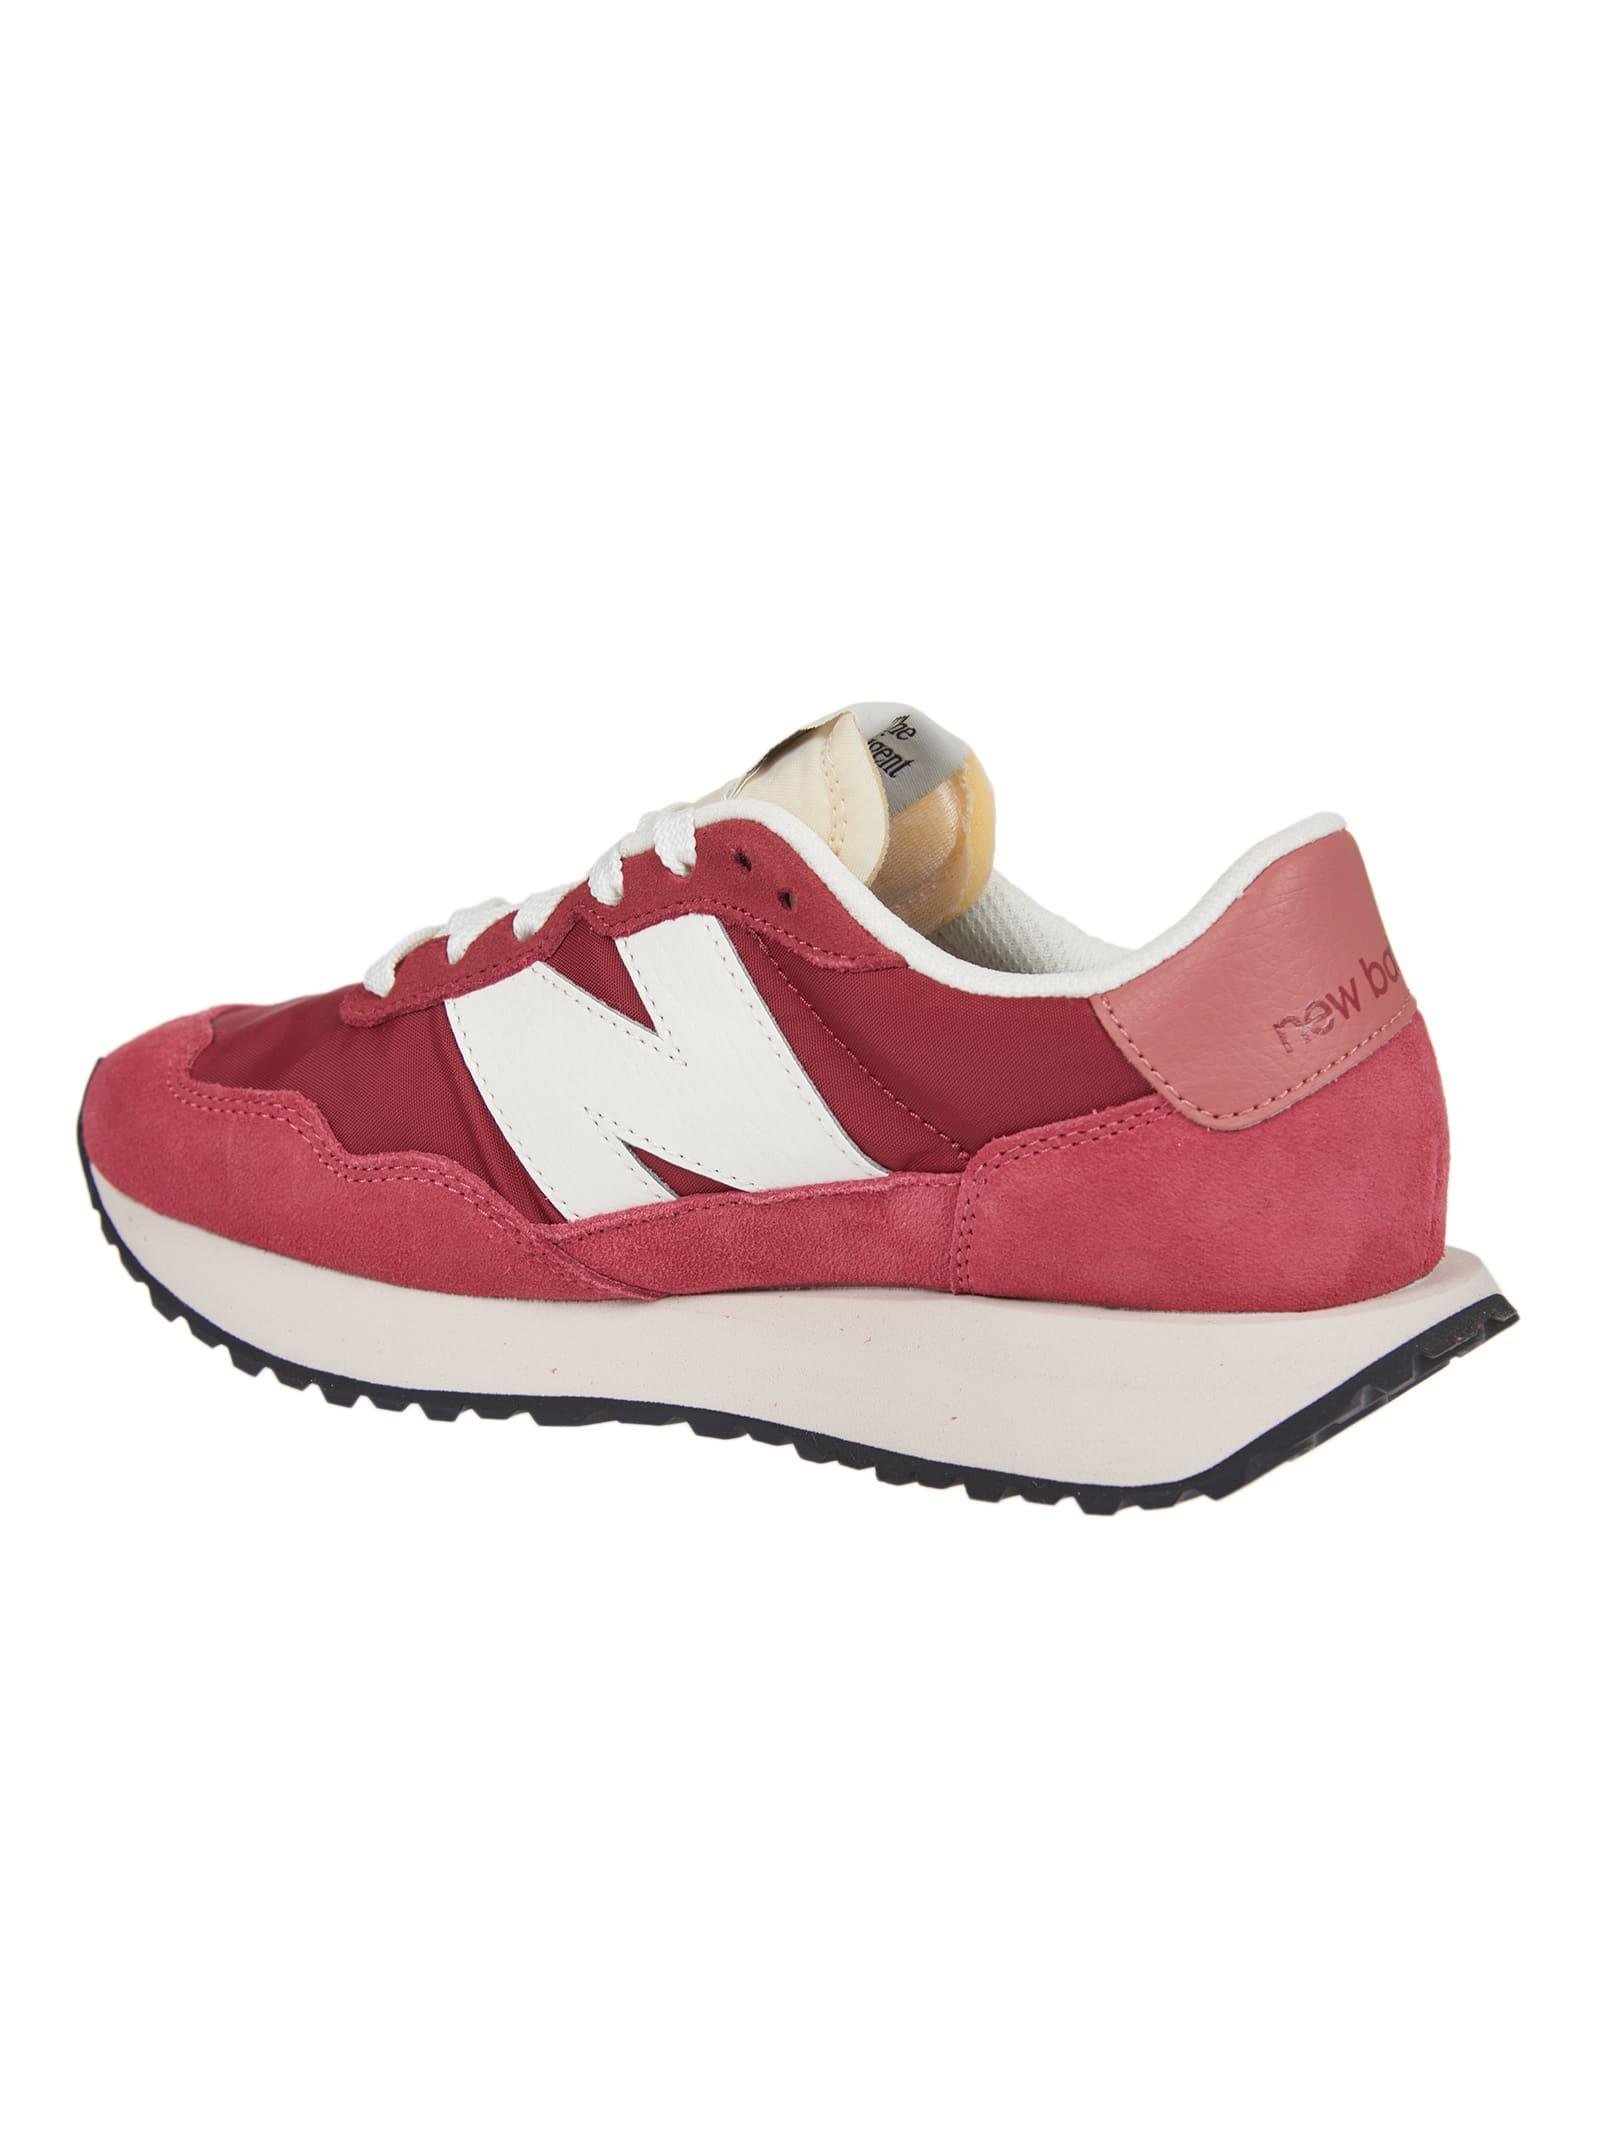 New Balance Suede 237 Sneakers - Women in Red | Lyst